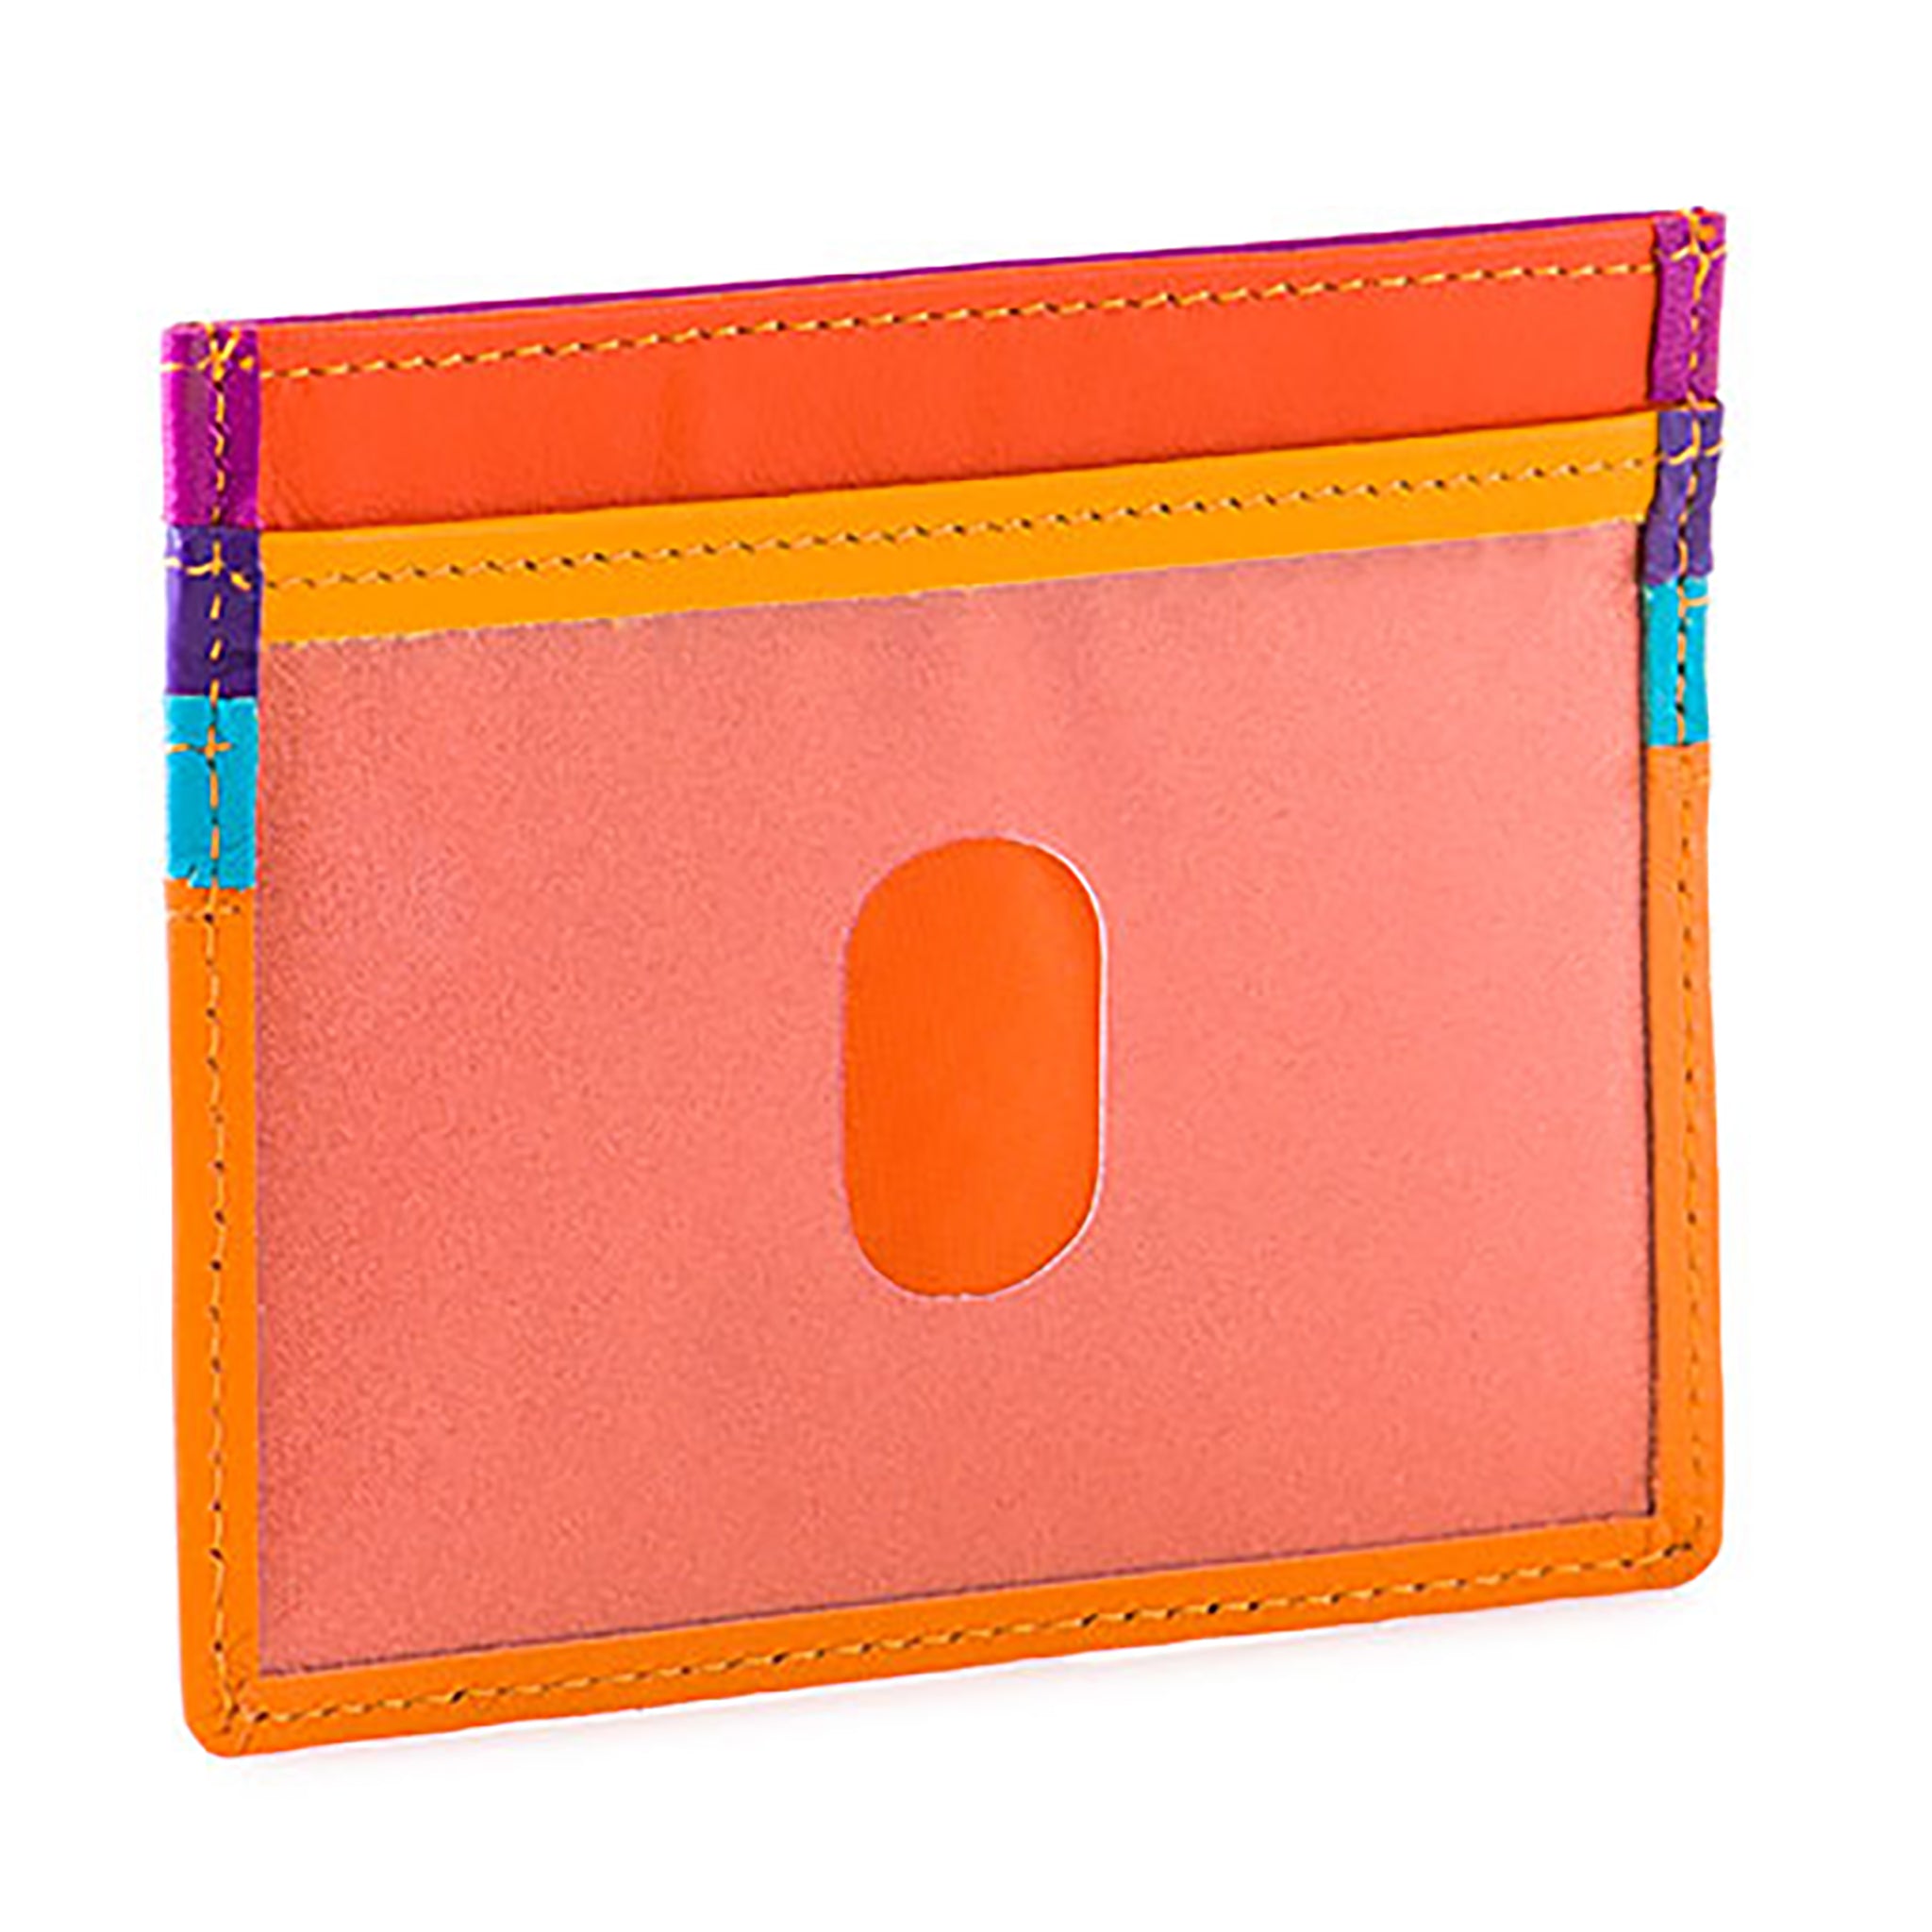 Fancy Small Credit Card & Coins Holder Wallet For Girls Color